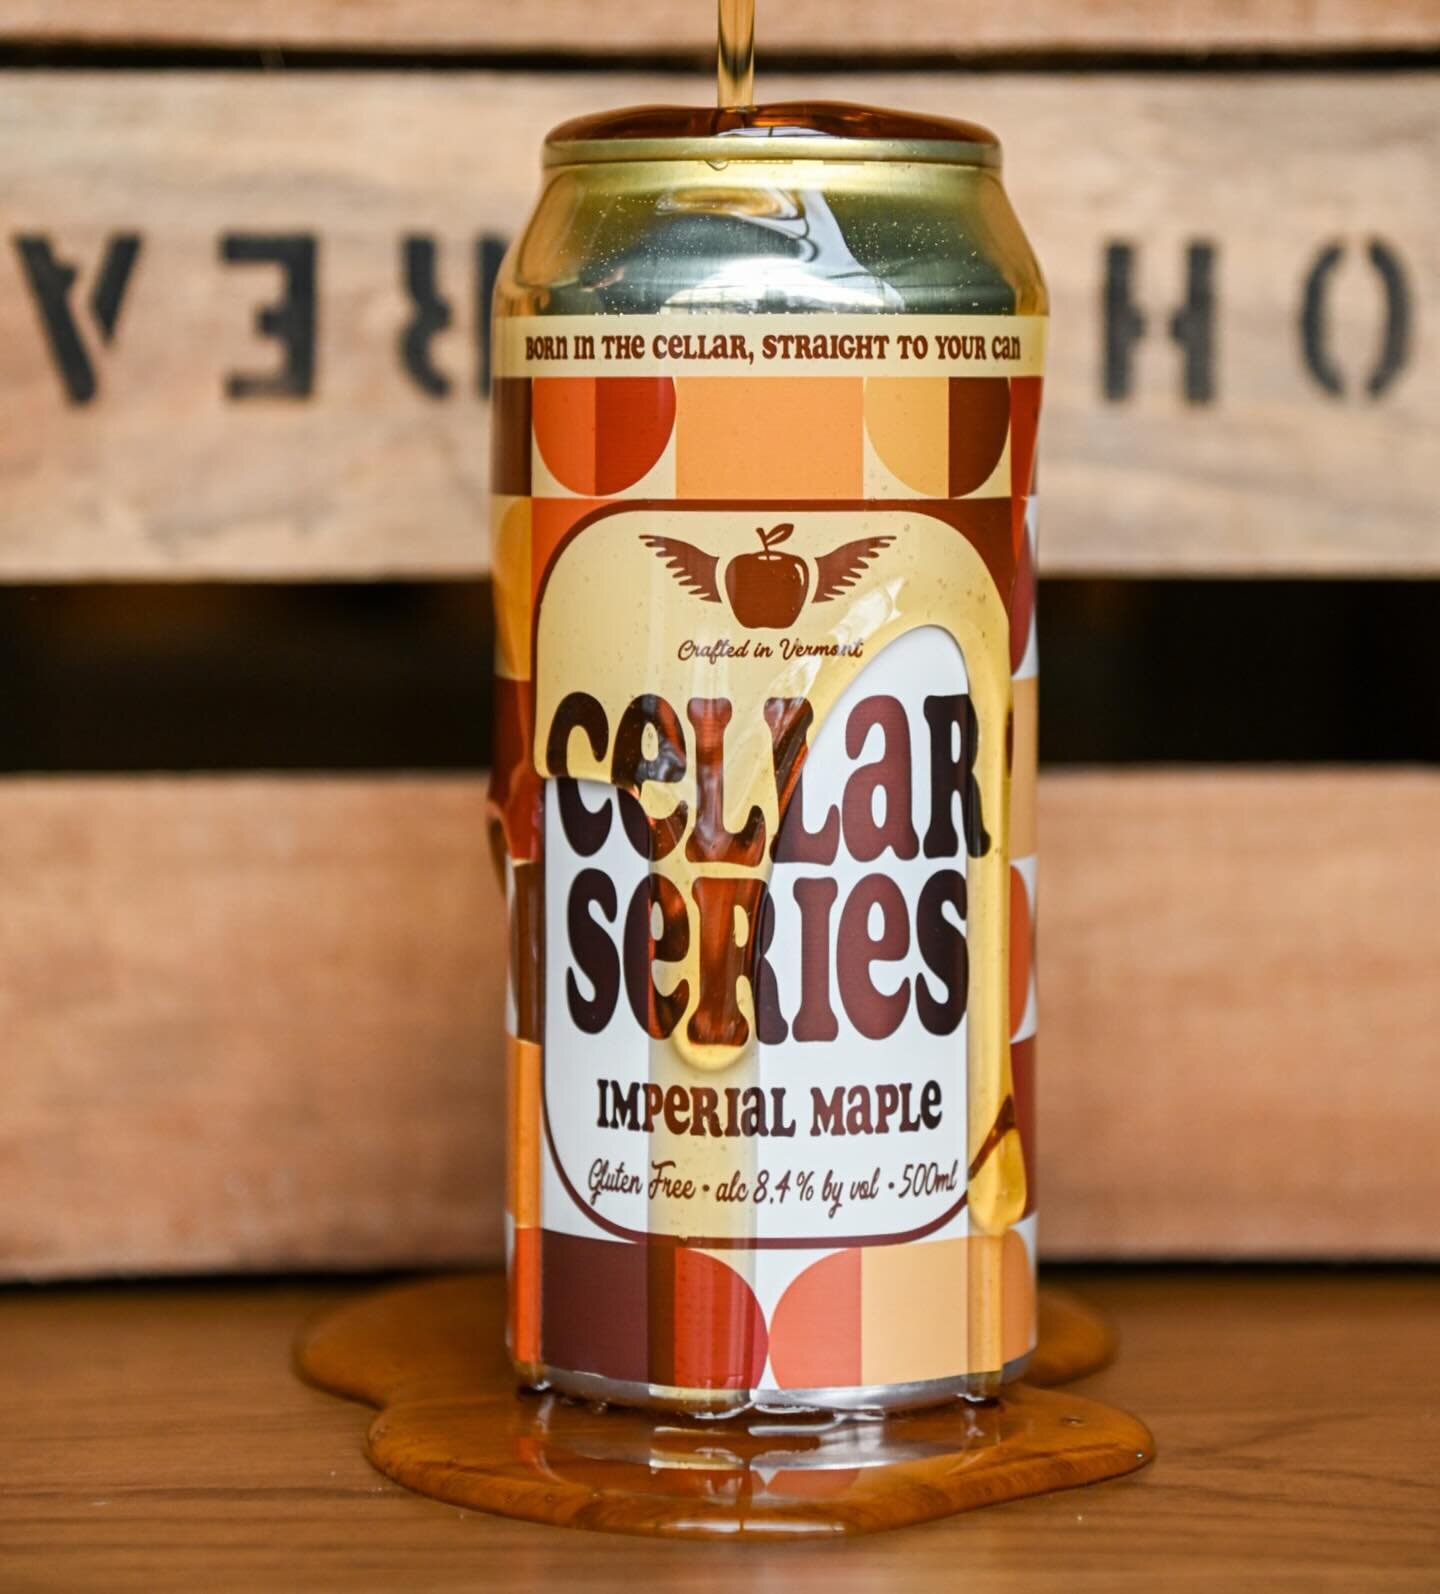 You guessed it! The latest installment of our Cellar Series has arrived, in honor of Vermont&rsquo;s 5th season - Maple Season. Imperial Maple is an 8.4% blend of fresh pressed apples and maple syrup straight from our friends down the road at @nebras